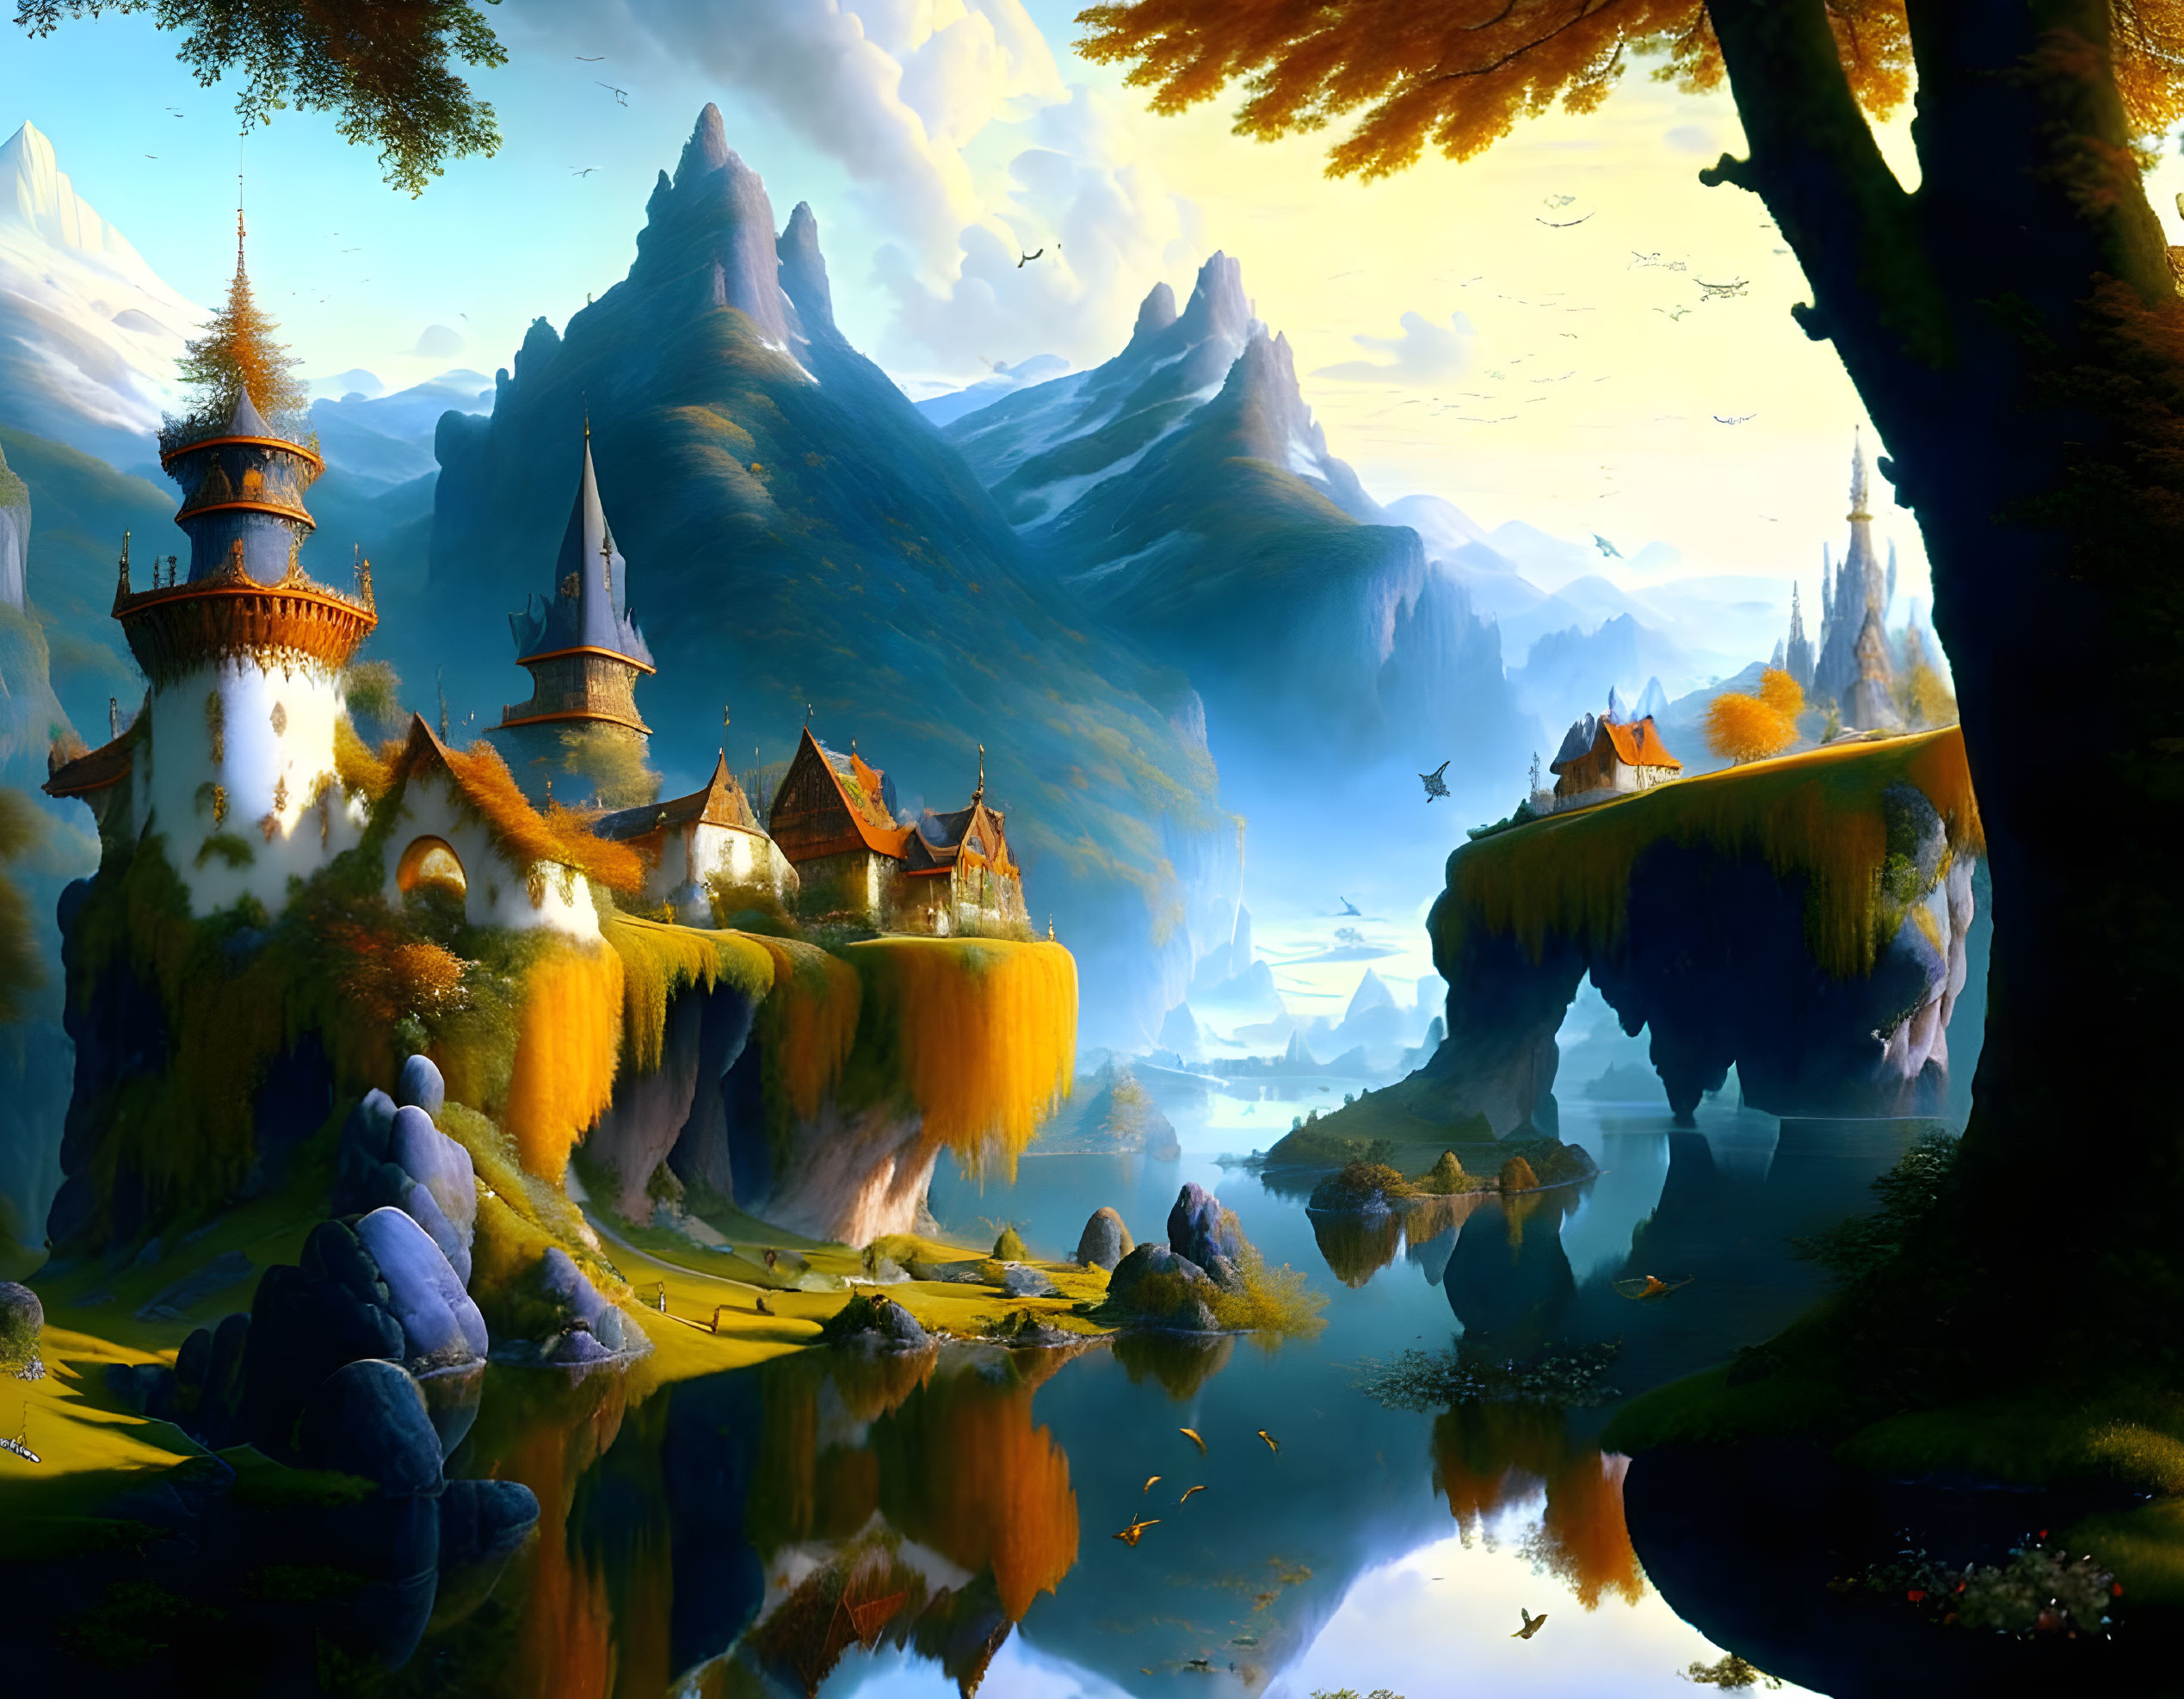 Majestic castles on floating islands above serene lake and mountains under golden sky